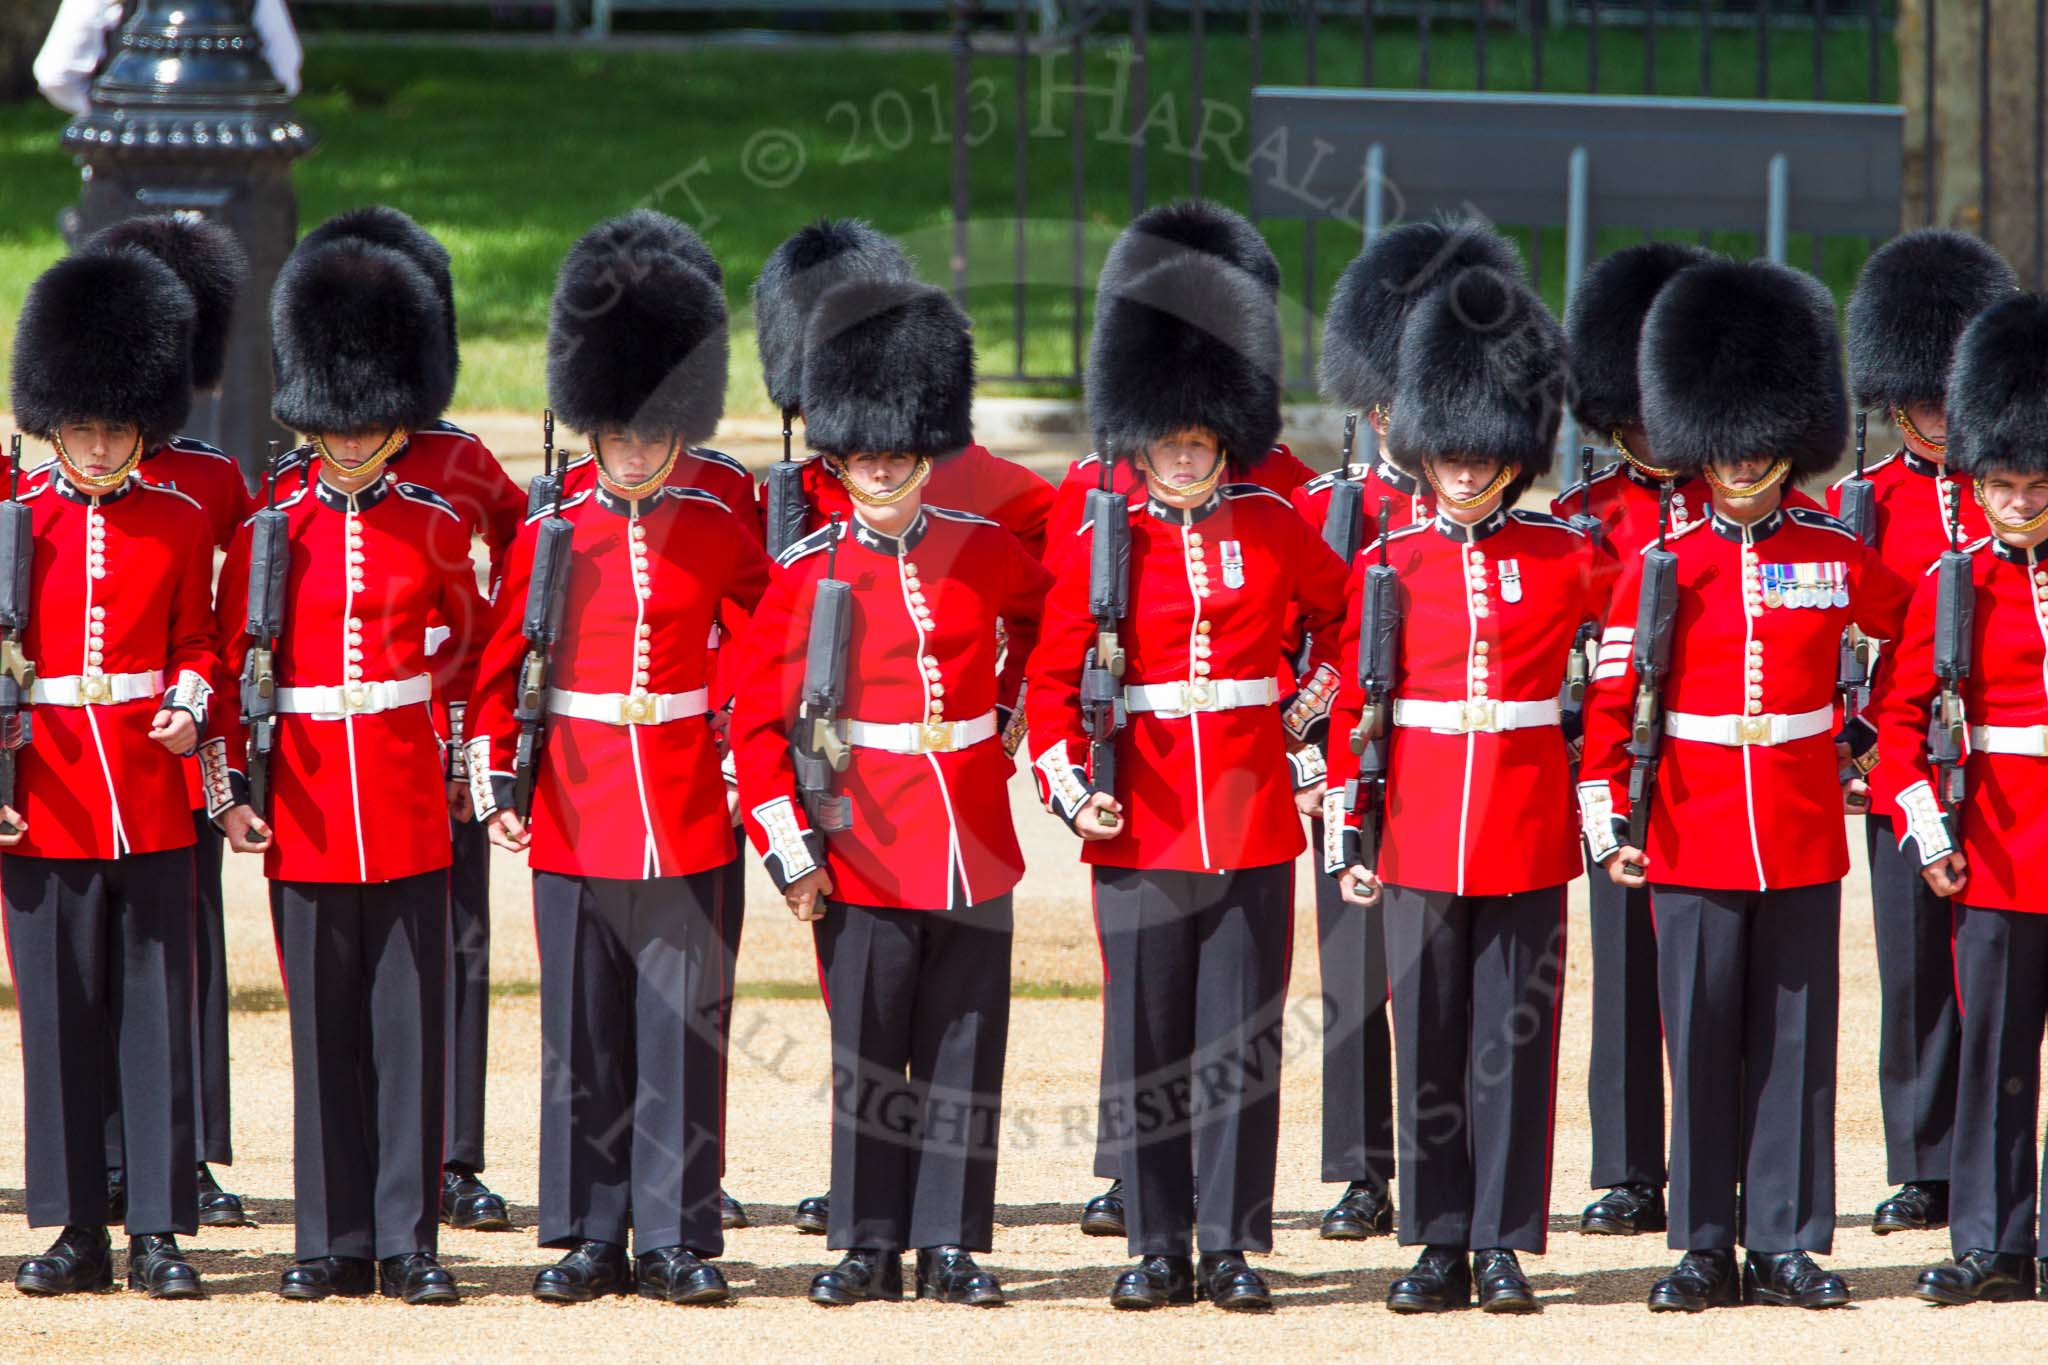 The Colonel's Review 2013: No. 2 Guard, 1 st Battalion Welsh Guards are mounting their bayonets..
Horse Guards Parade, Westminster,
London SW1,

United Kingdom,
on 08 June 2013 at 10:43, image #205